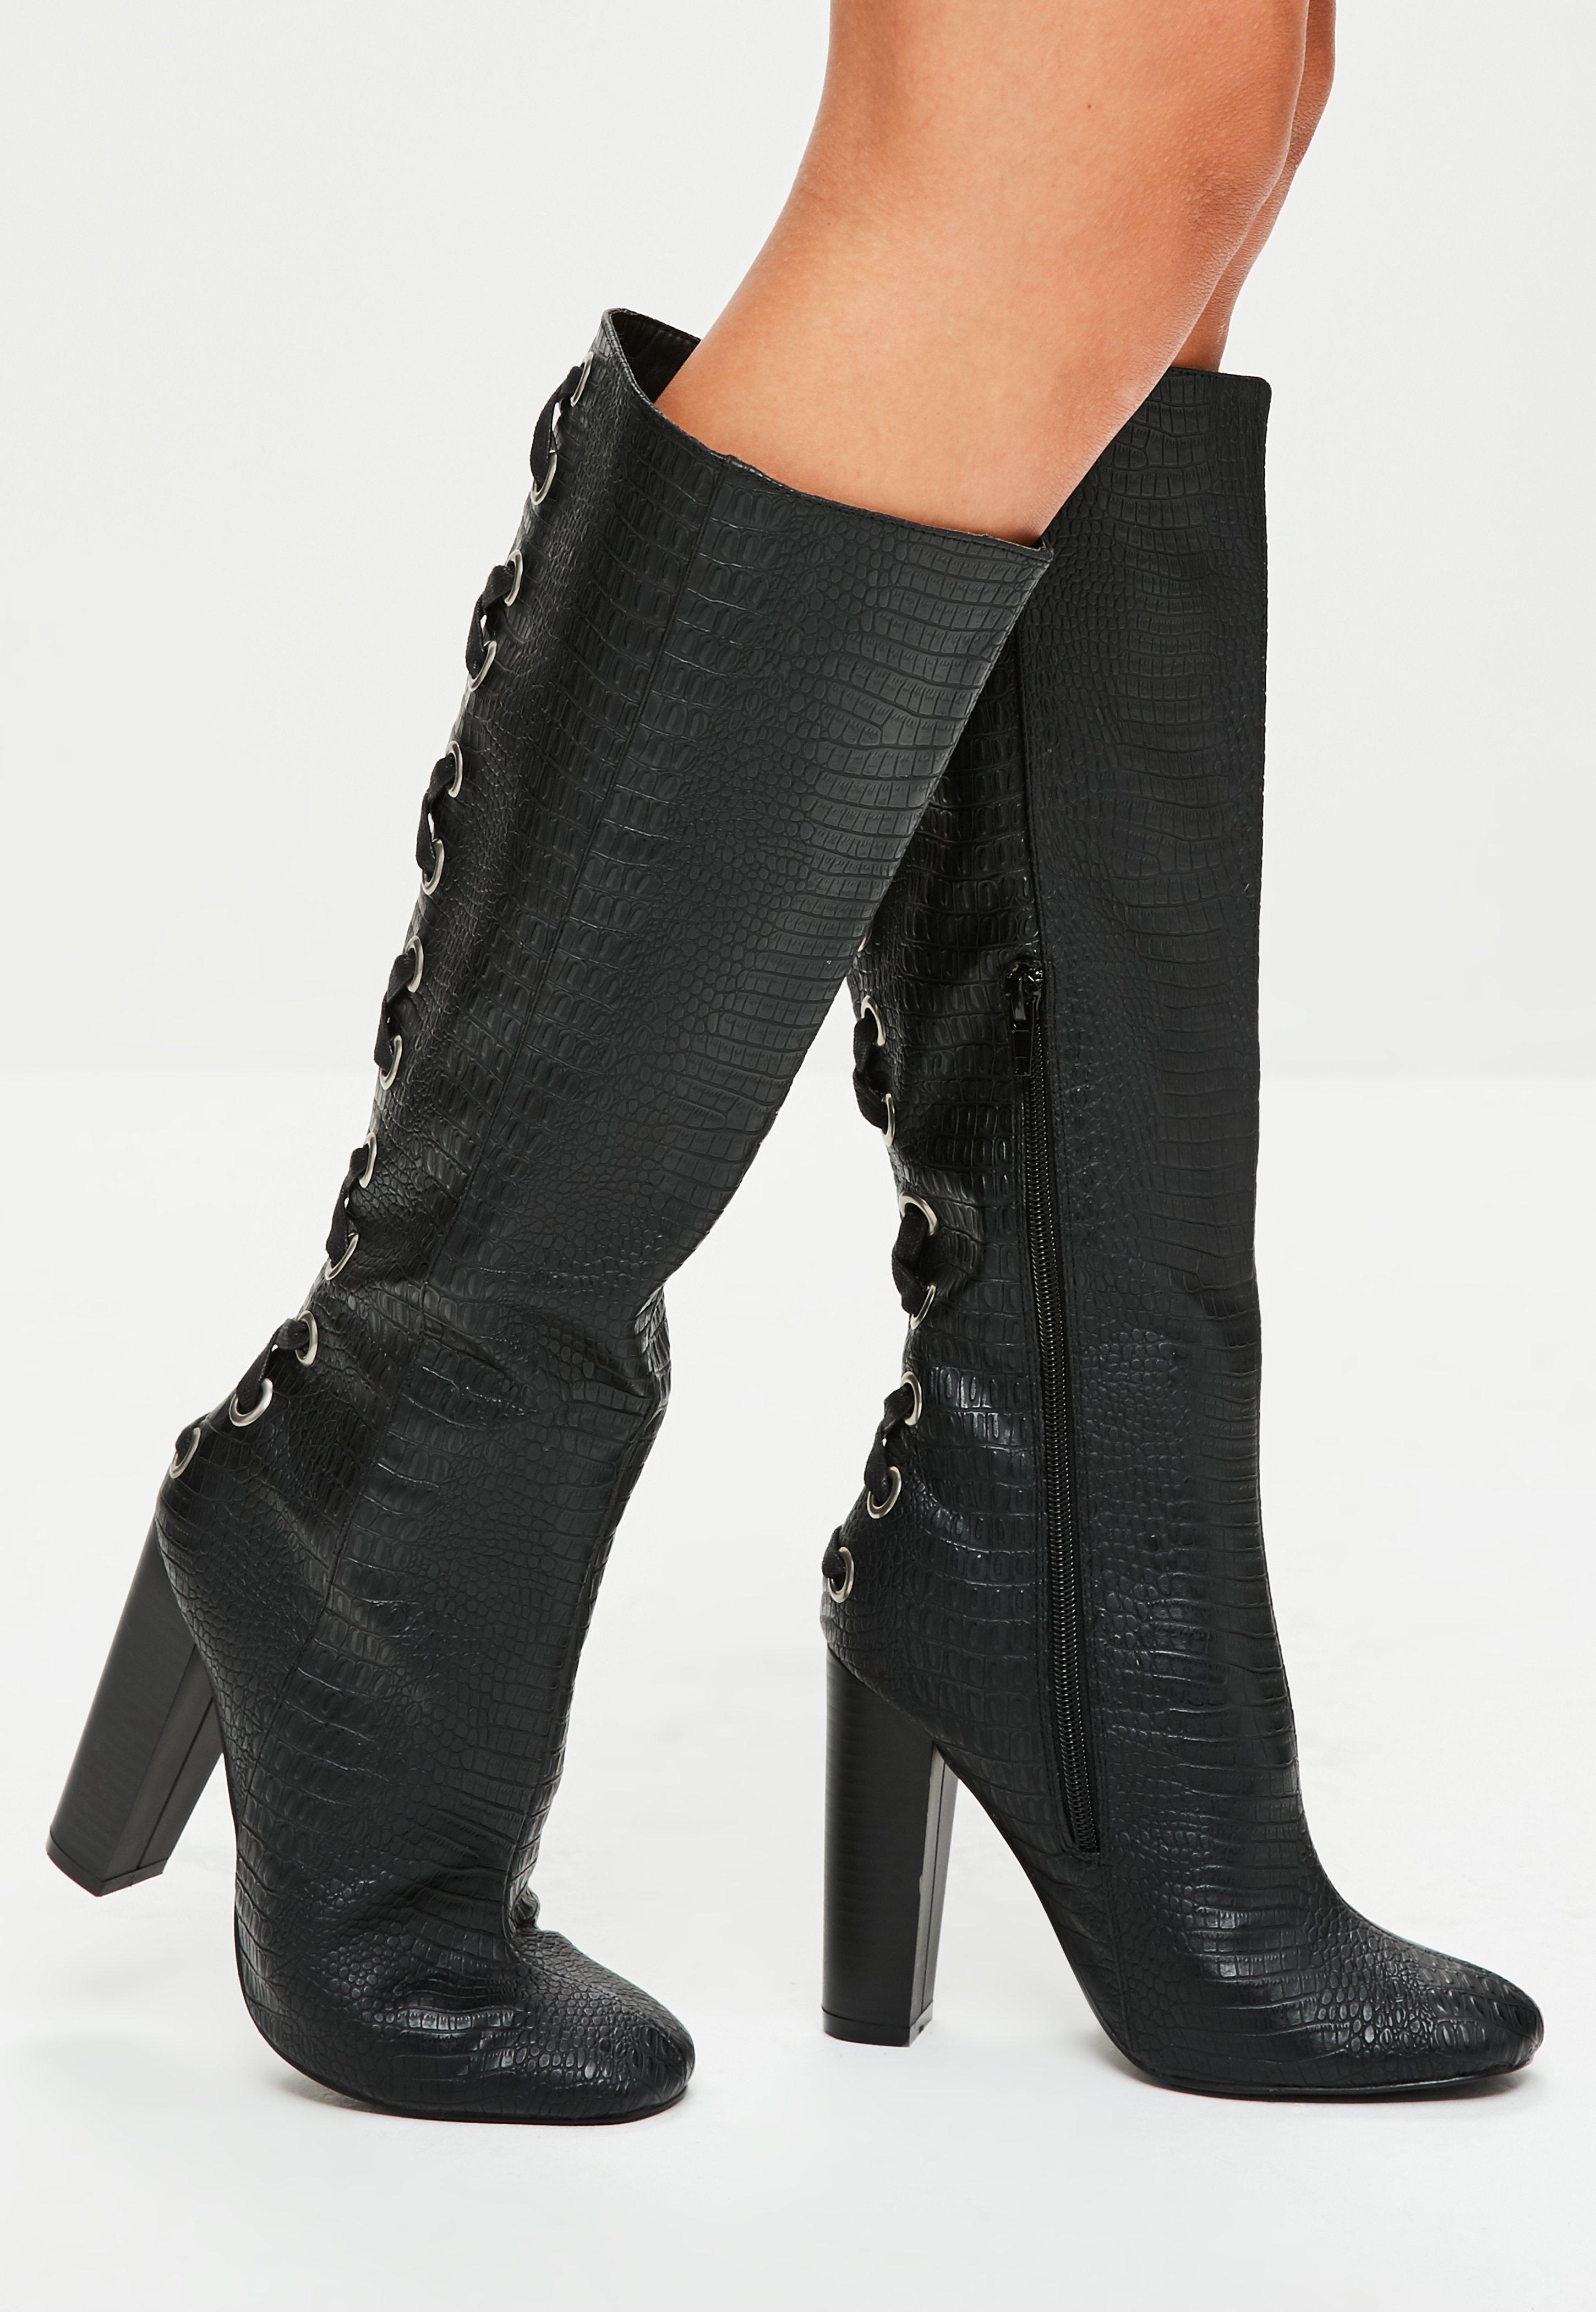 Missguided Black Snake Print Lace Up Knee High Boots - Lyst